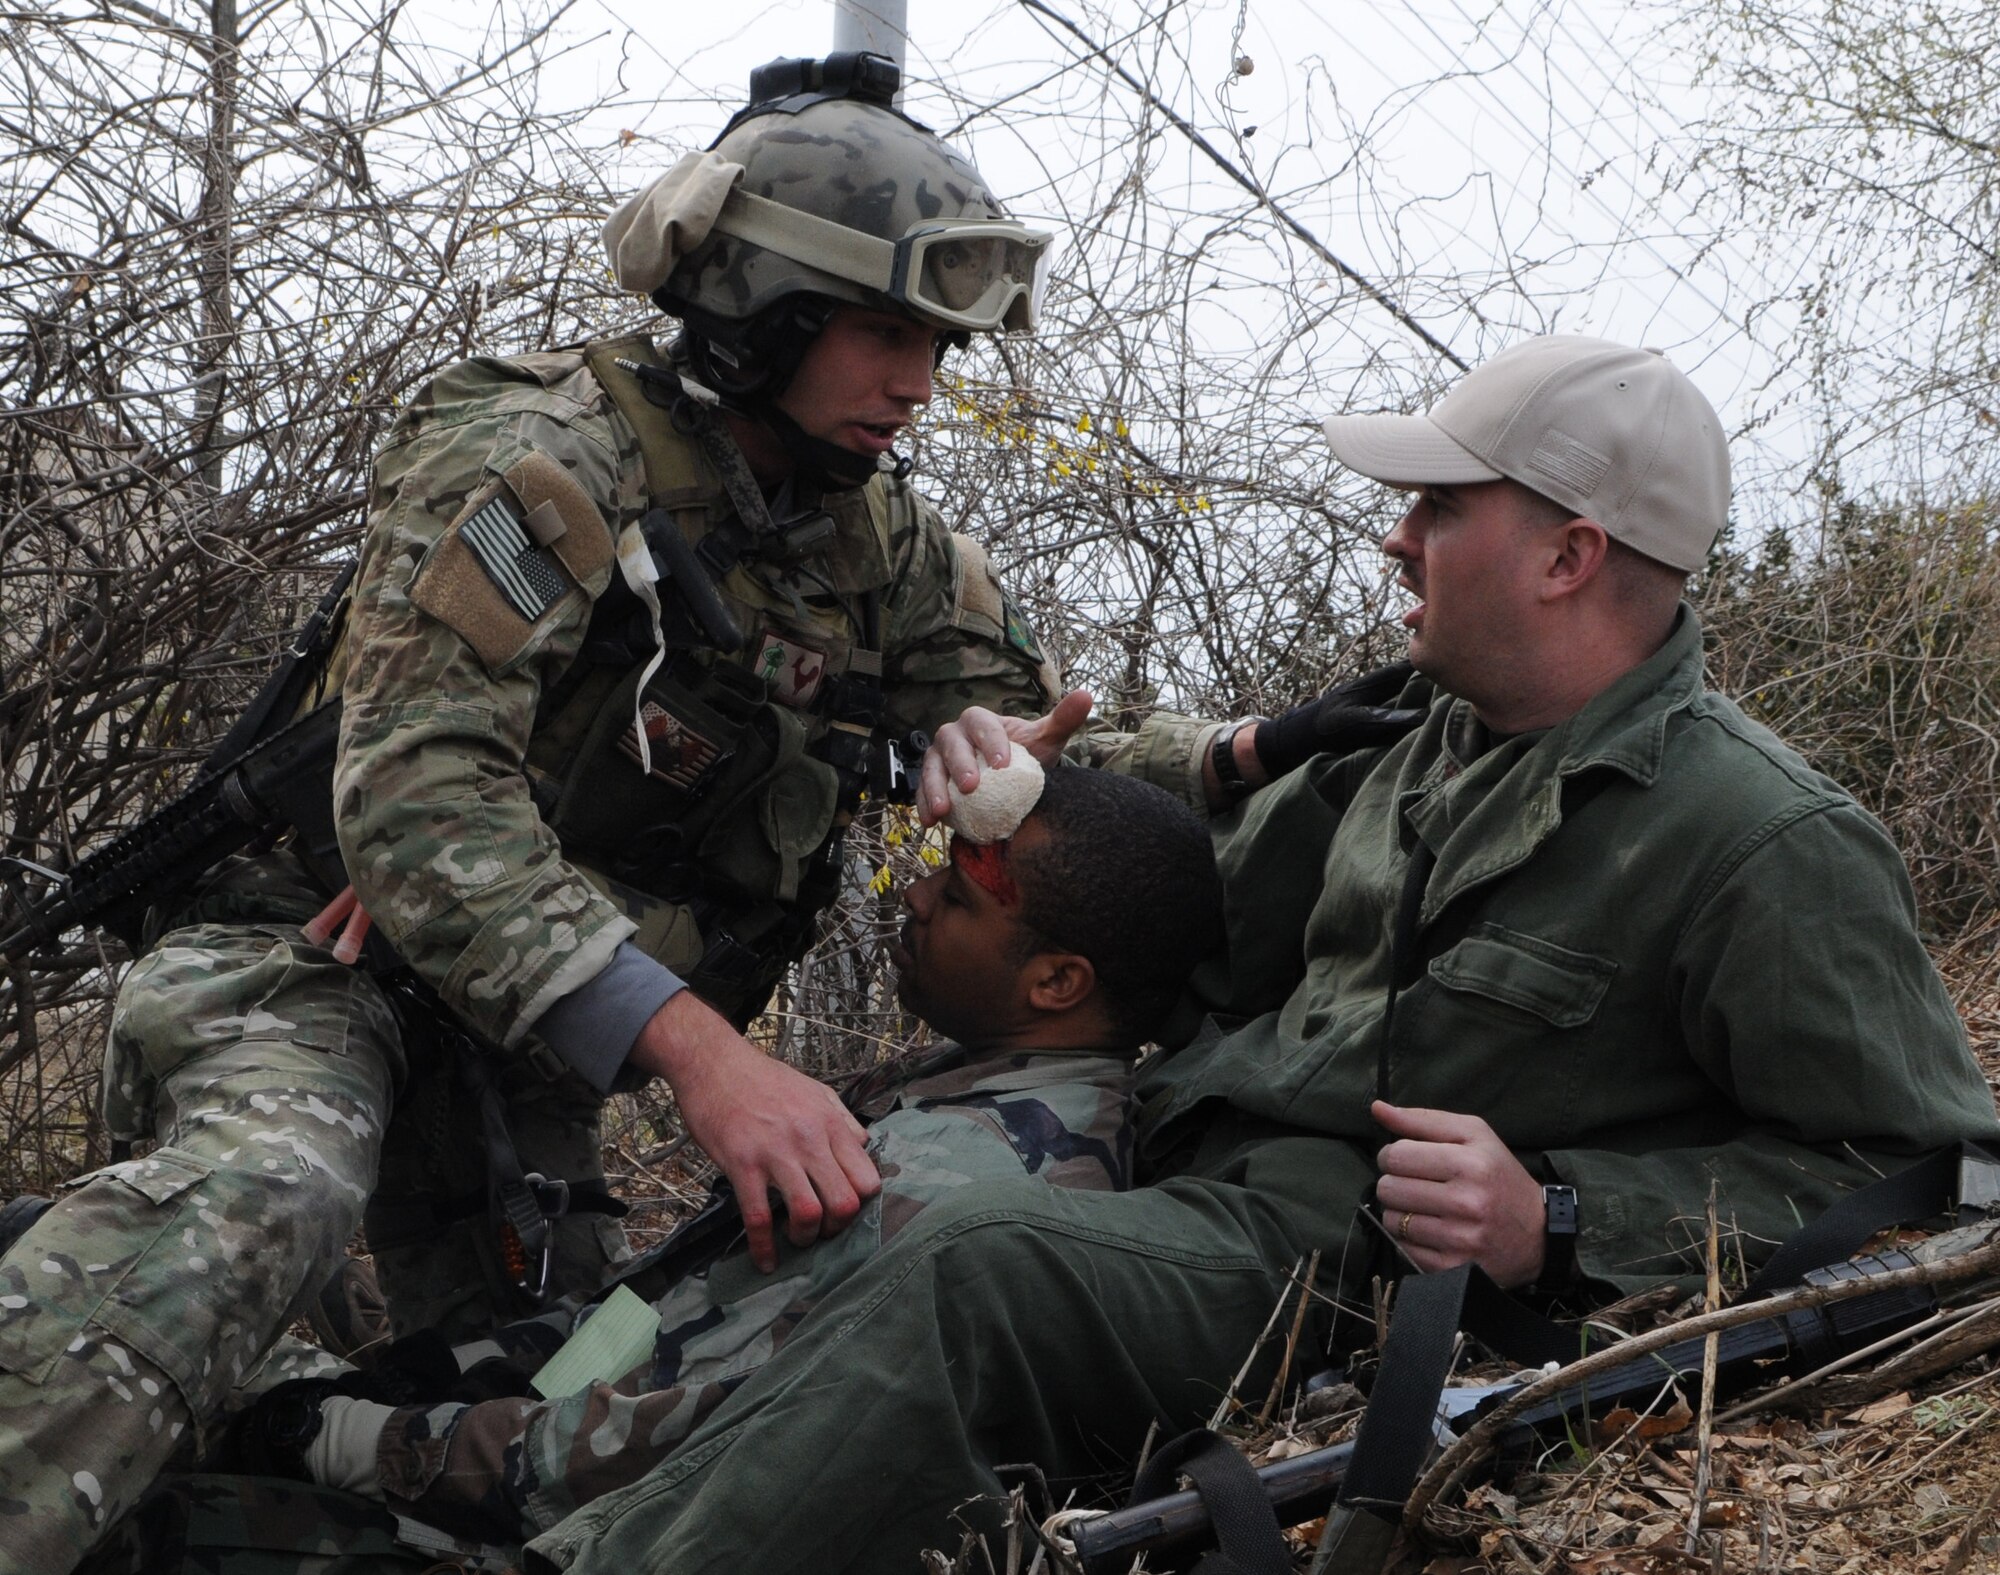 DAEGU AIR BASE, Republic of Korea -- Senior Airman Cody Cerny, a pararescueman from the 320th Special Tactics Squadron, tells Staff Sgt. Brain McDermitt to hold pressure on a simulated head wound on Staff Sgt. Raphael Thompson during a mass casualty exercise here March 27. The scenario is part of the 353rd Special Operations Group’s annual operational readiness exercise. (U.S. Air Force photo by Tech. Sgt. Aaron Cram)